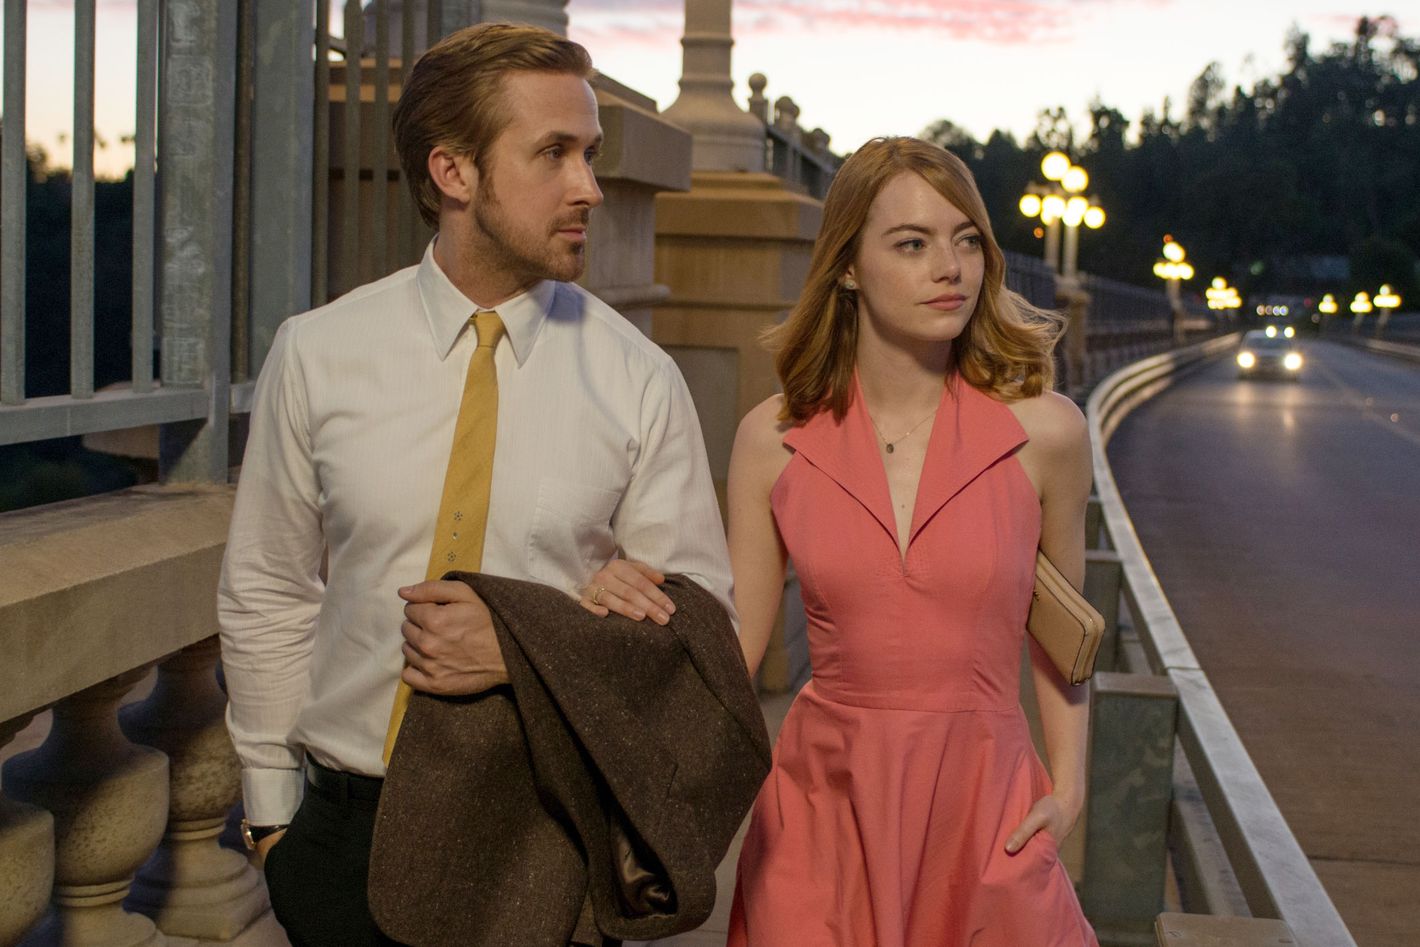 5 things to know about La La Land from Ryan Gosling and Emma Stone